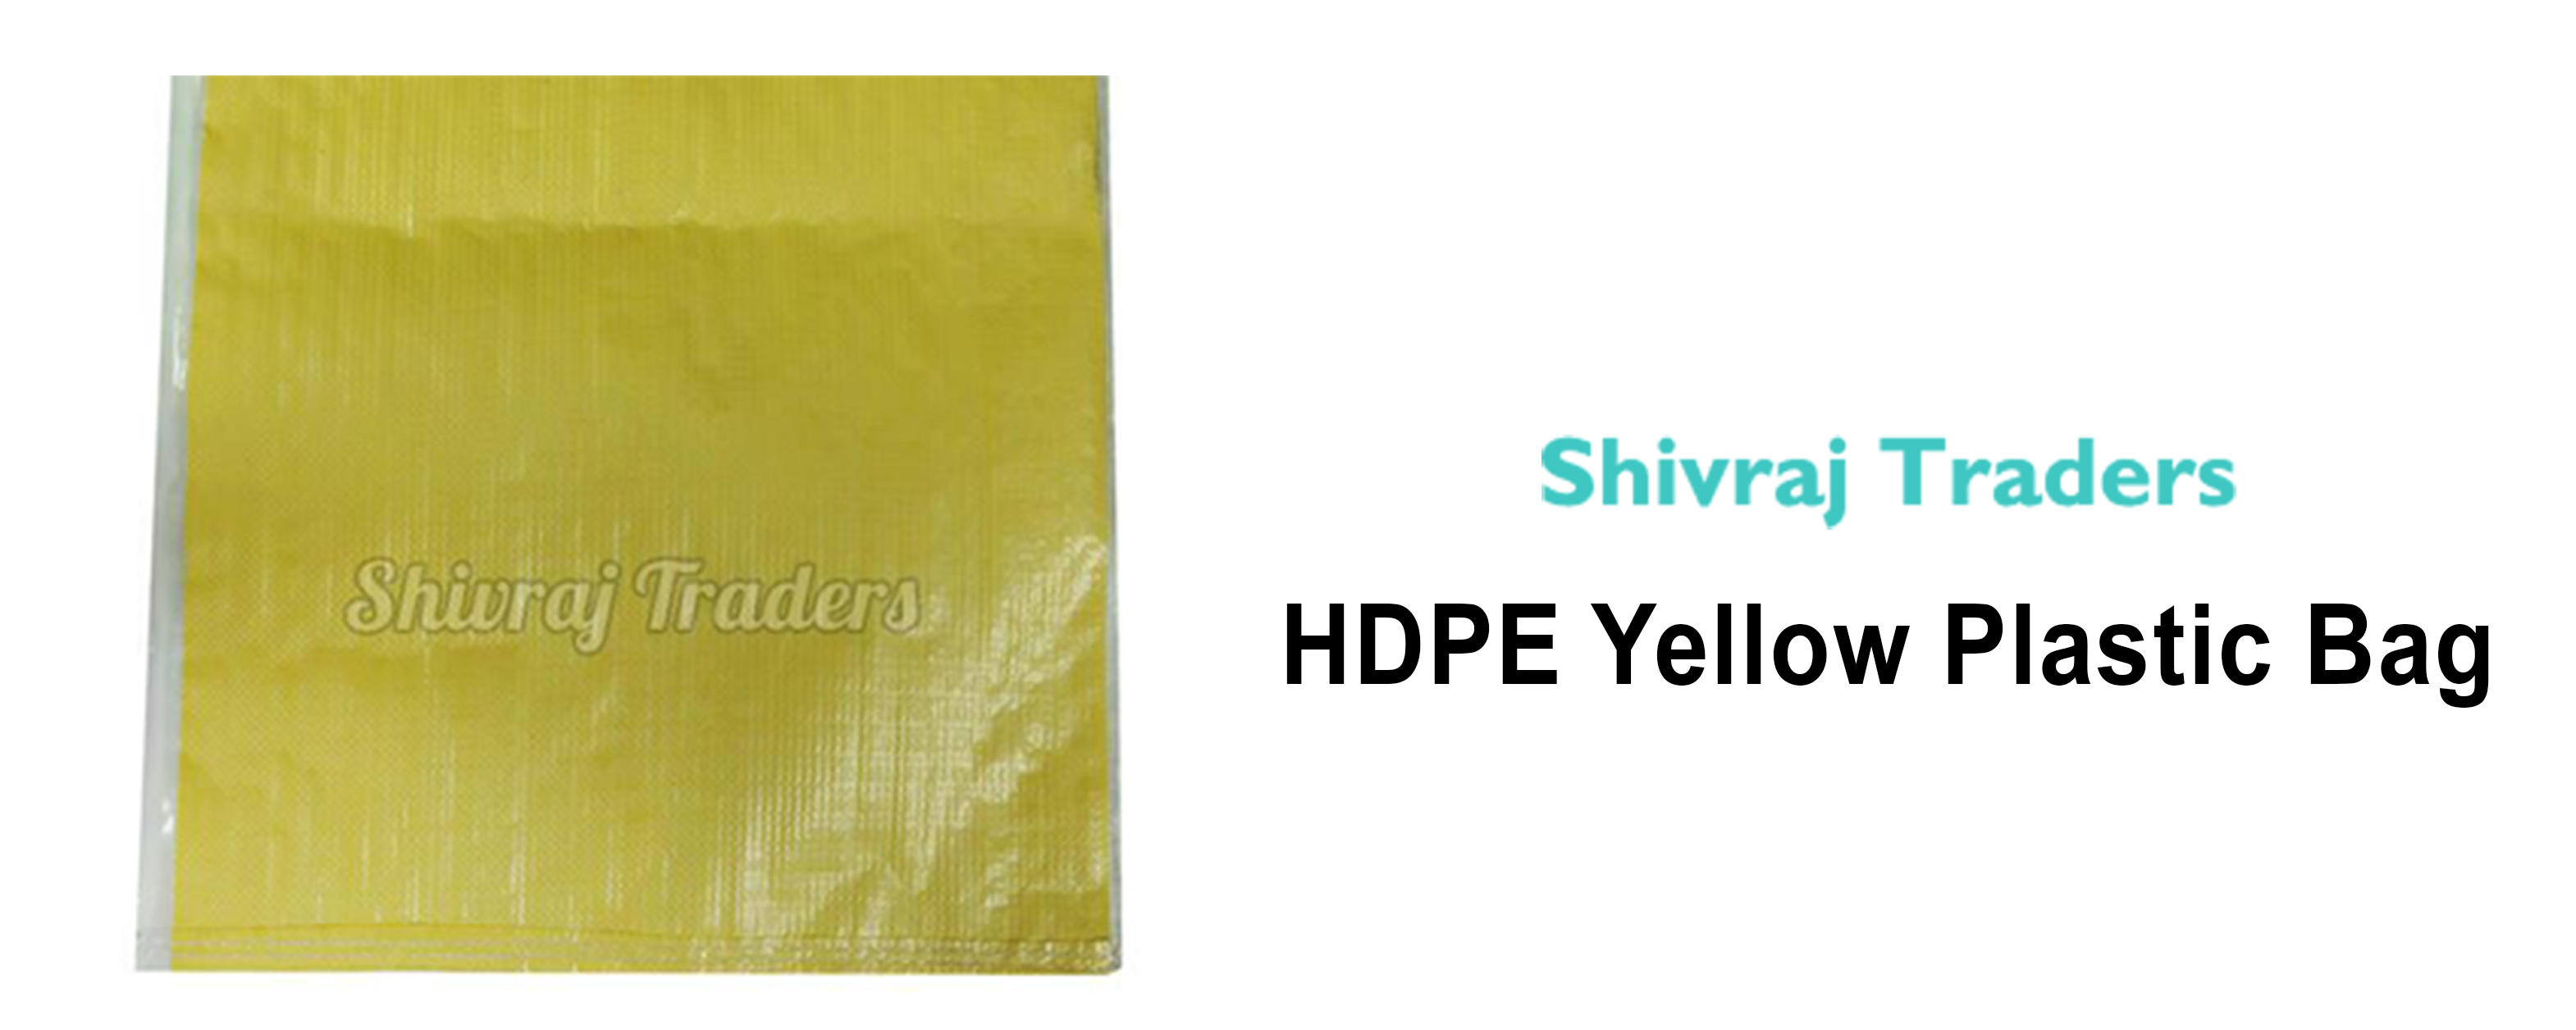 What Are The Benefits Of HDPE Yellow Plastic Bag?